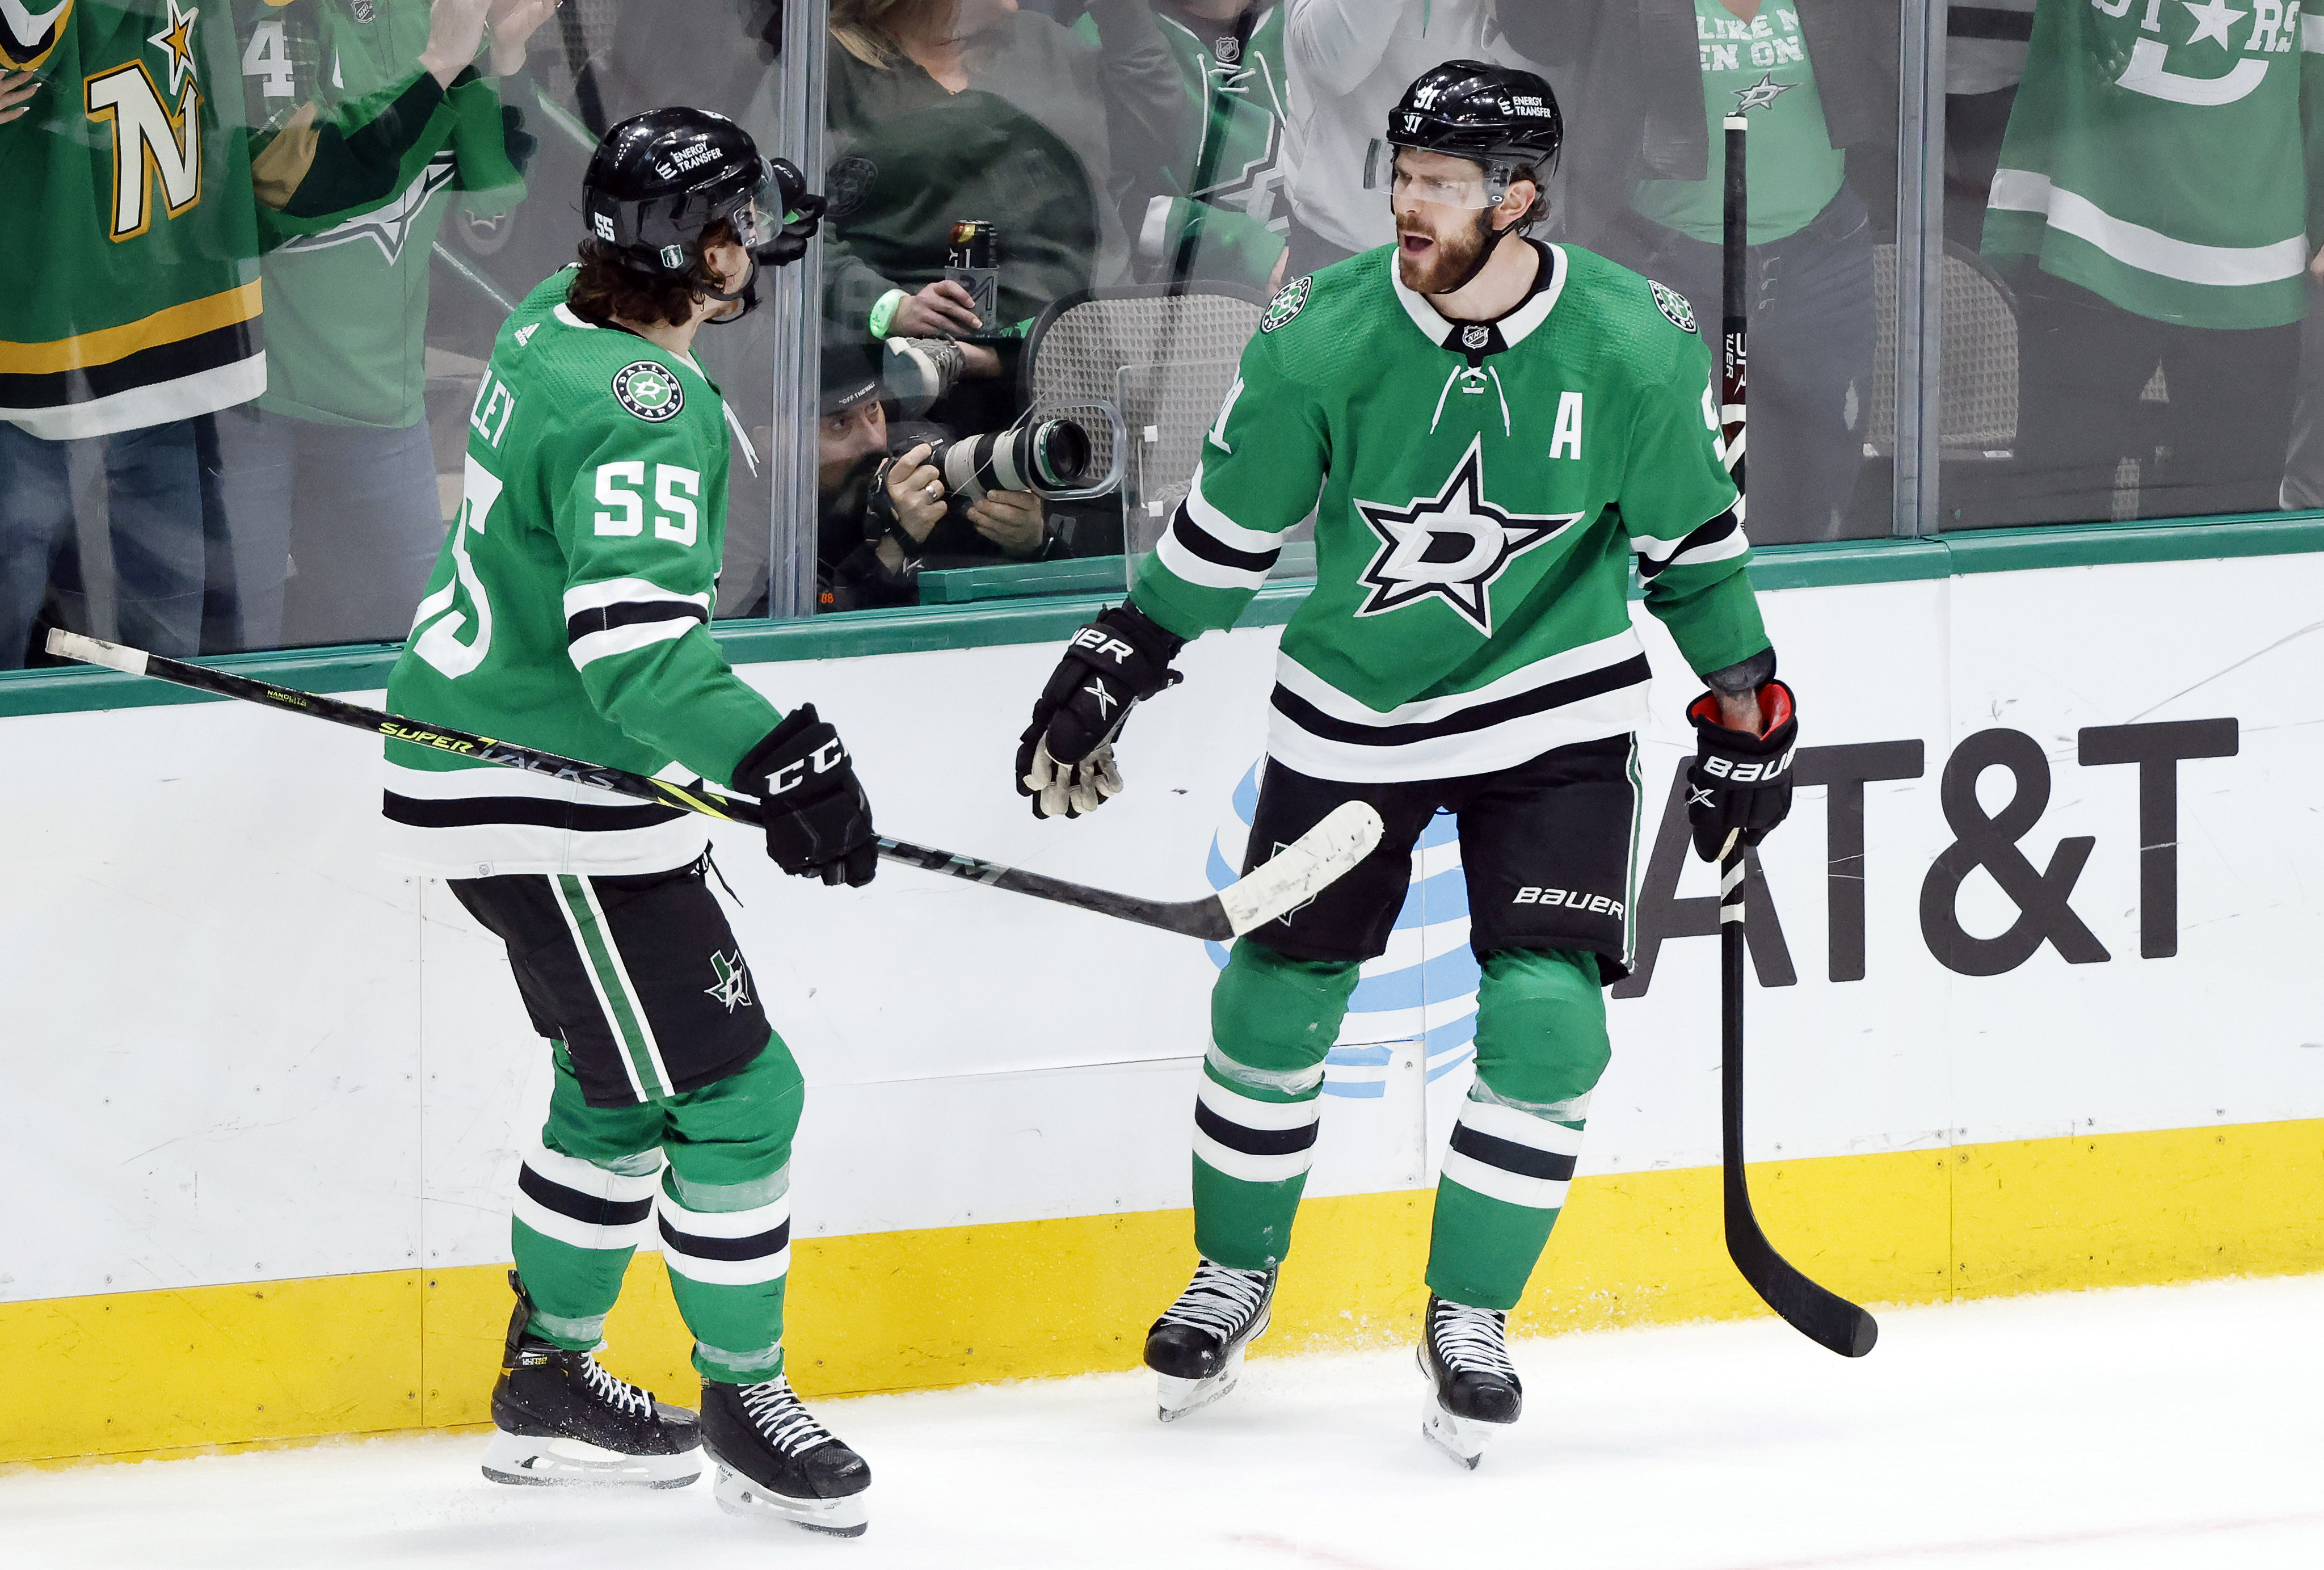 Tyler Seguin gives puck to fan, scores three vs. Bruins - Sports